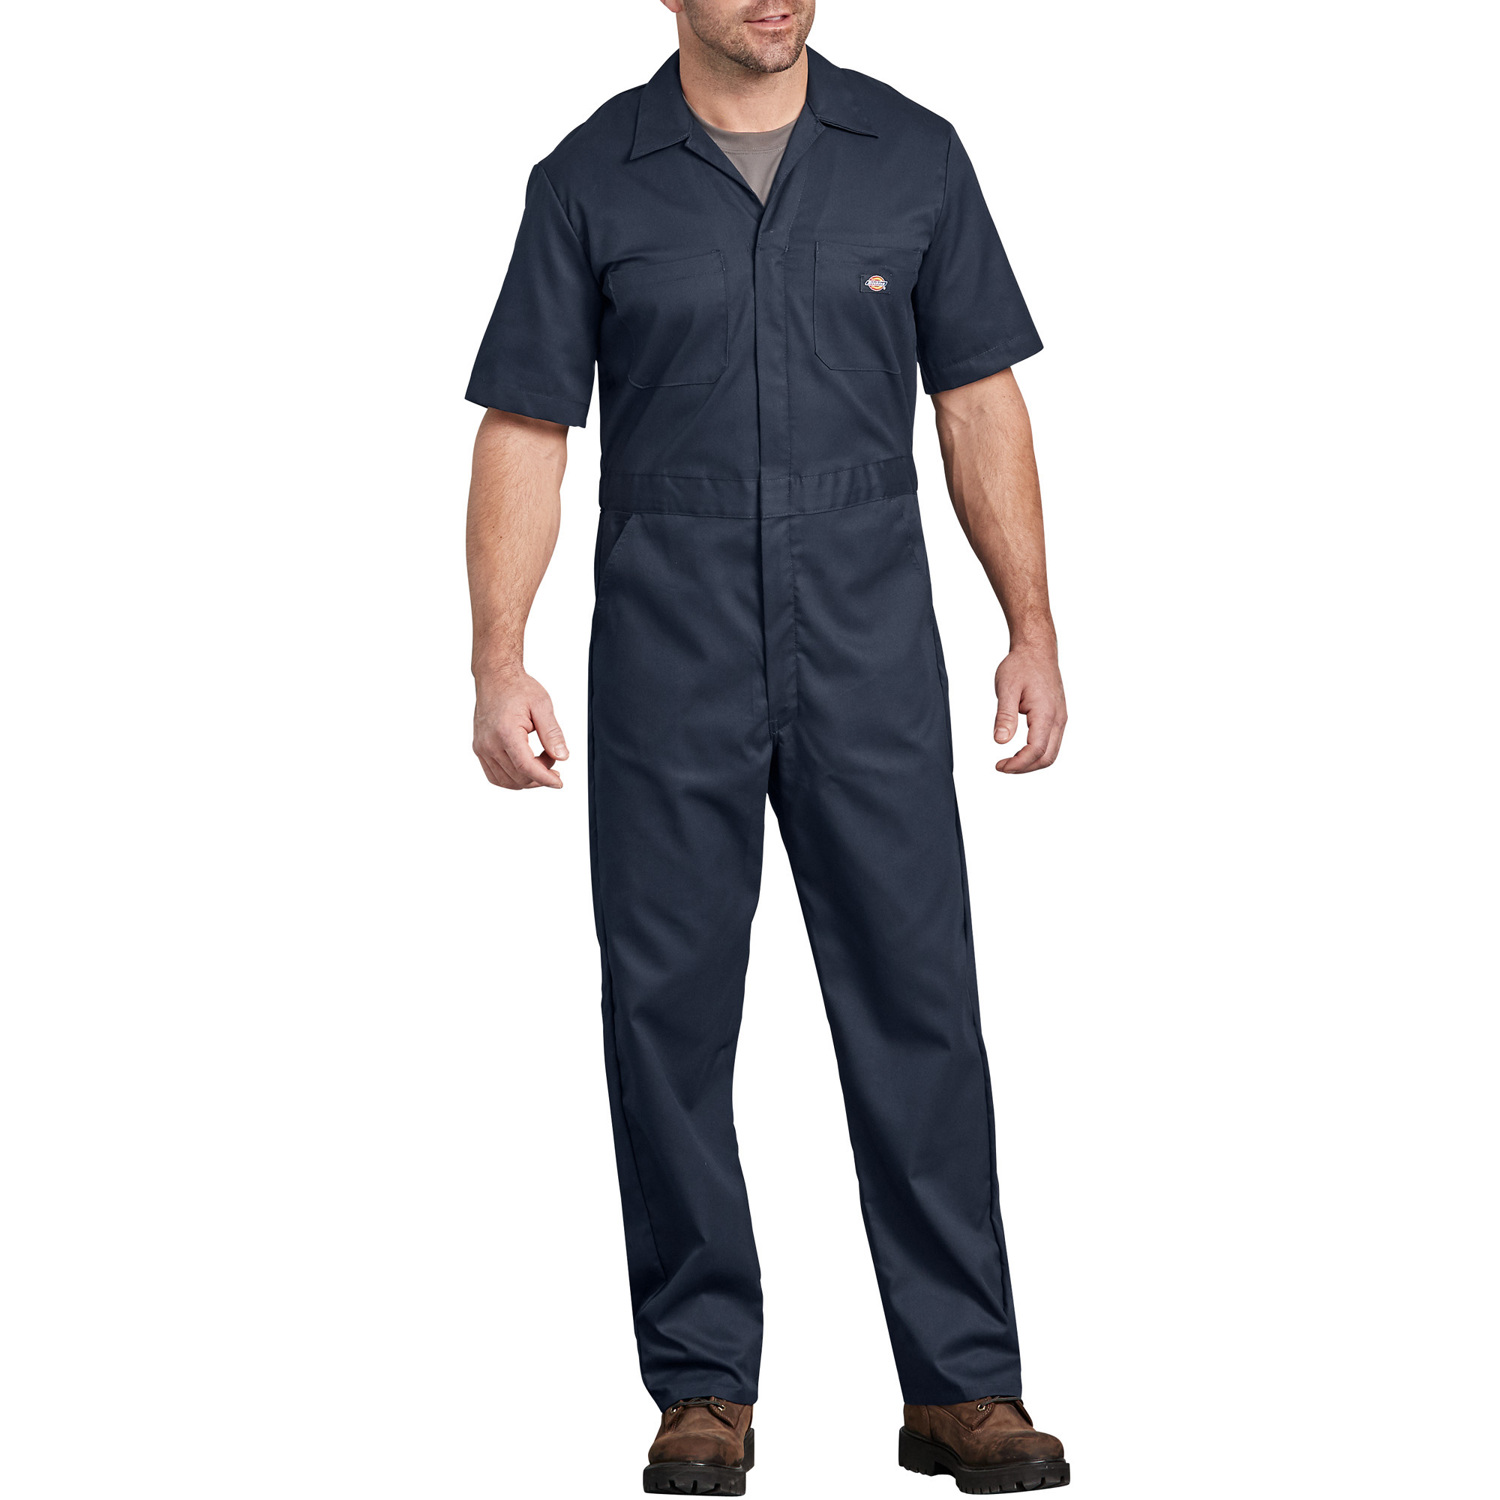 Dickies Men's Cotton/Polyester Coveralls Navy S pk Ace Hardware